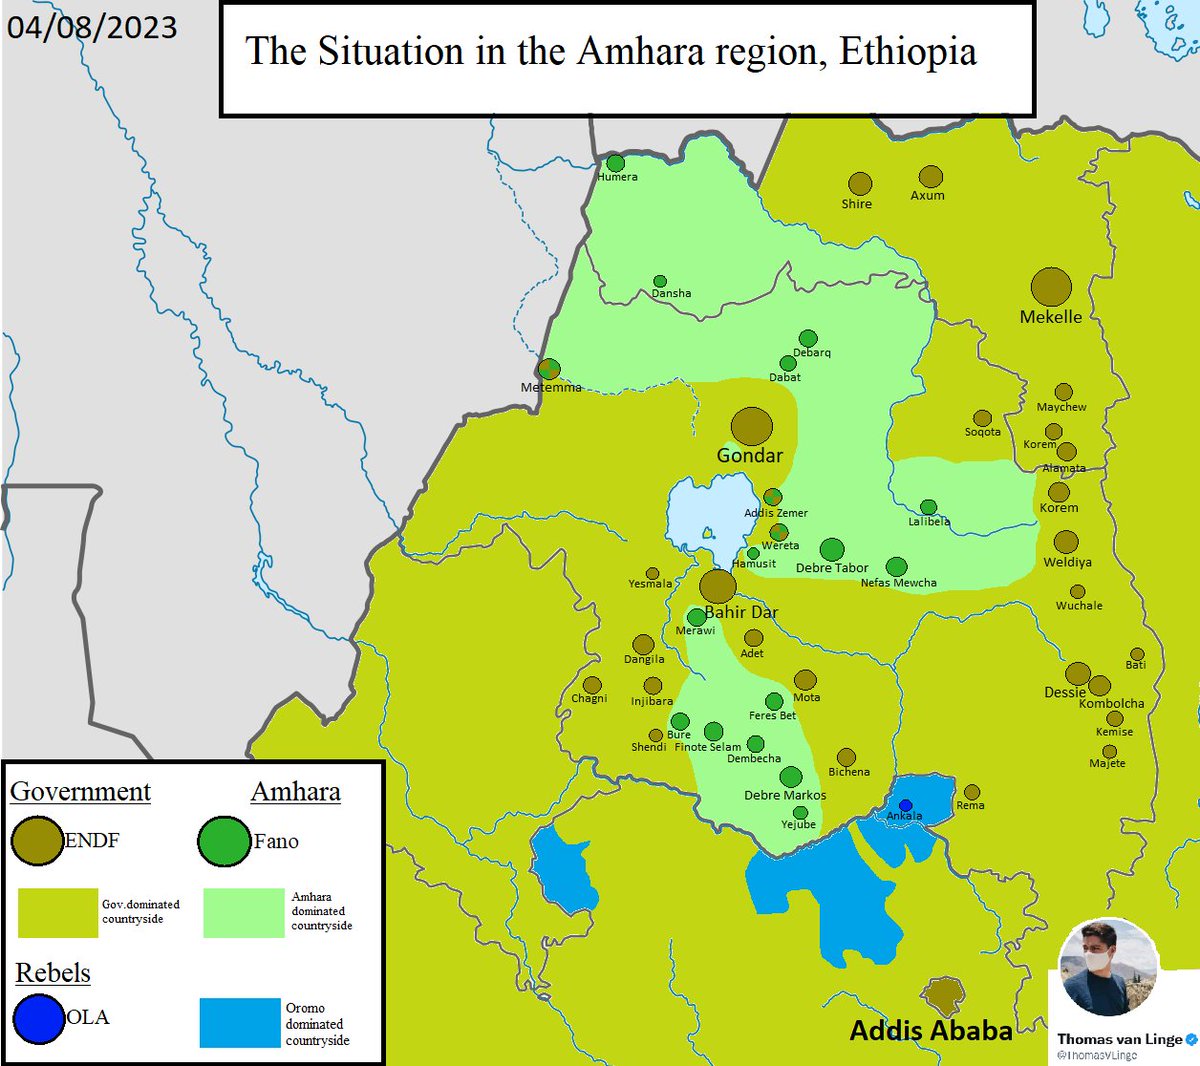 #Ethiopia 🇪🇹 MAP: the *approximate* situation in the #Amhara region as of 04/08/2023. Heavy fighting continues as the federal government has declared a state of emergency. #Fano militants are advancing to the regional capital #BahirDar as well as the largest city #Gondar